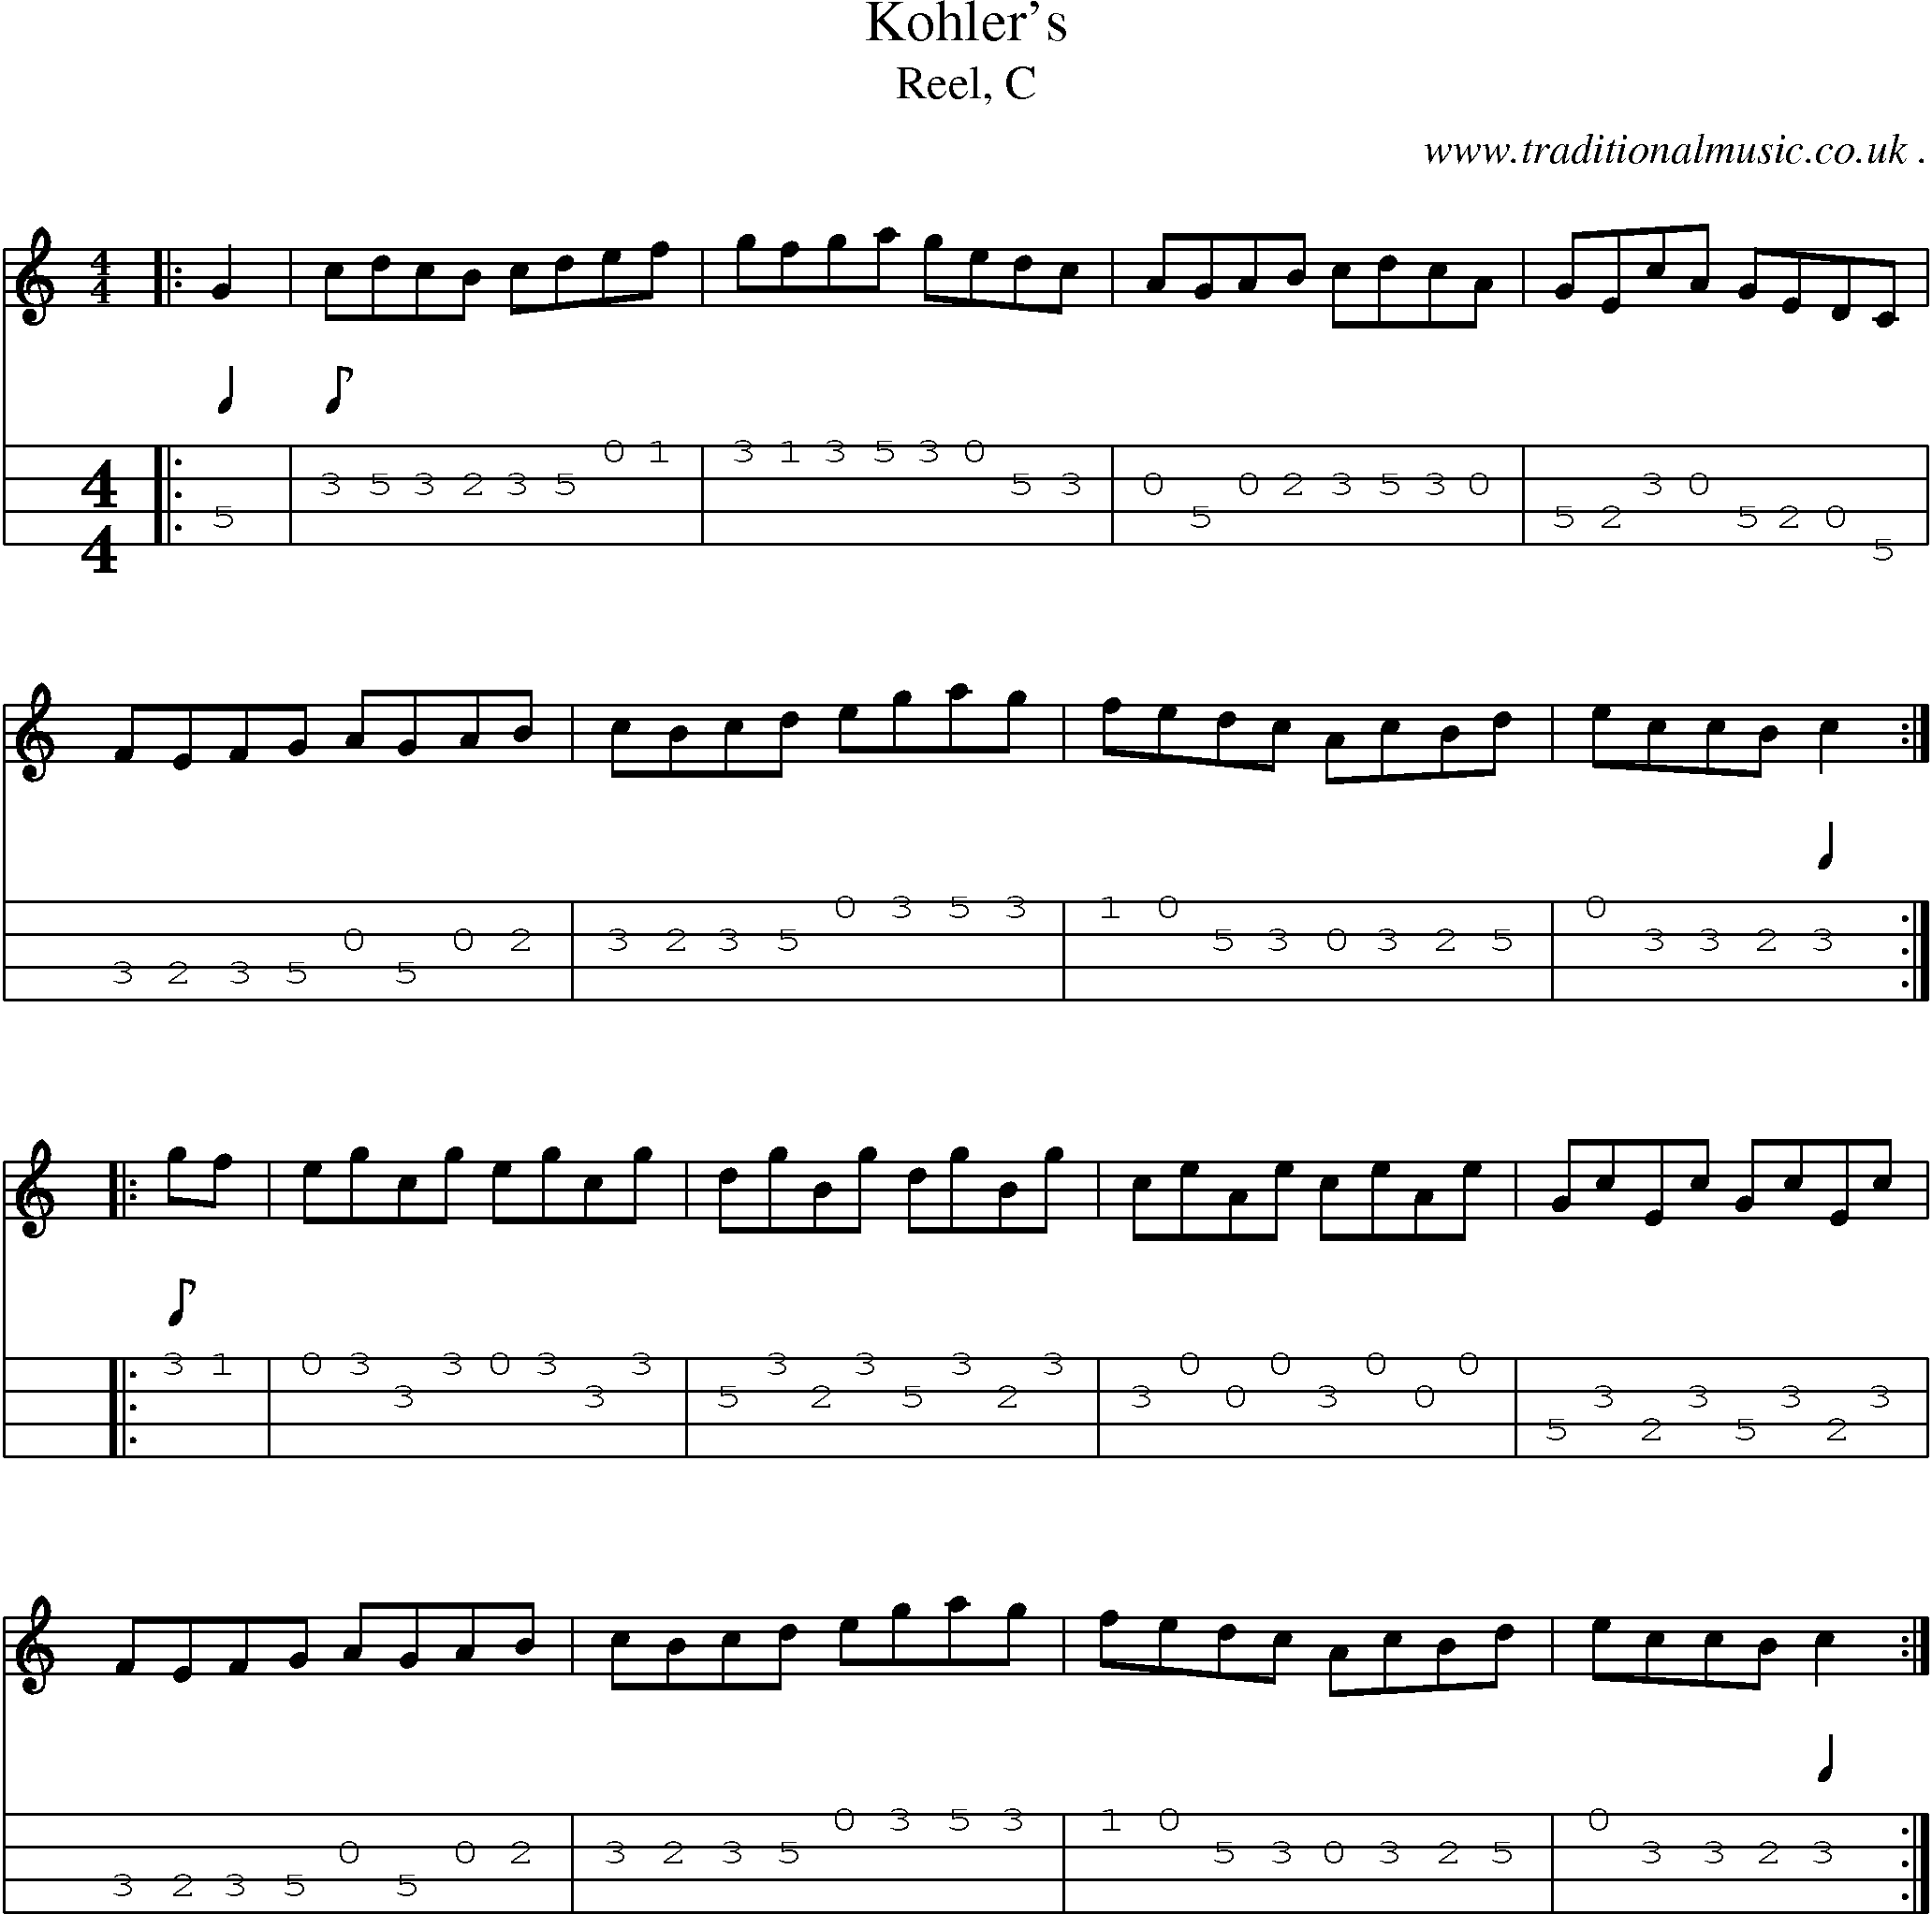 Sheet-music  score, Chords and Mandolin Tabs for Kohlers